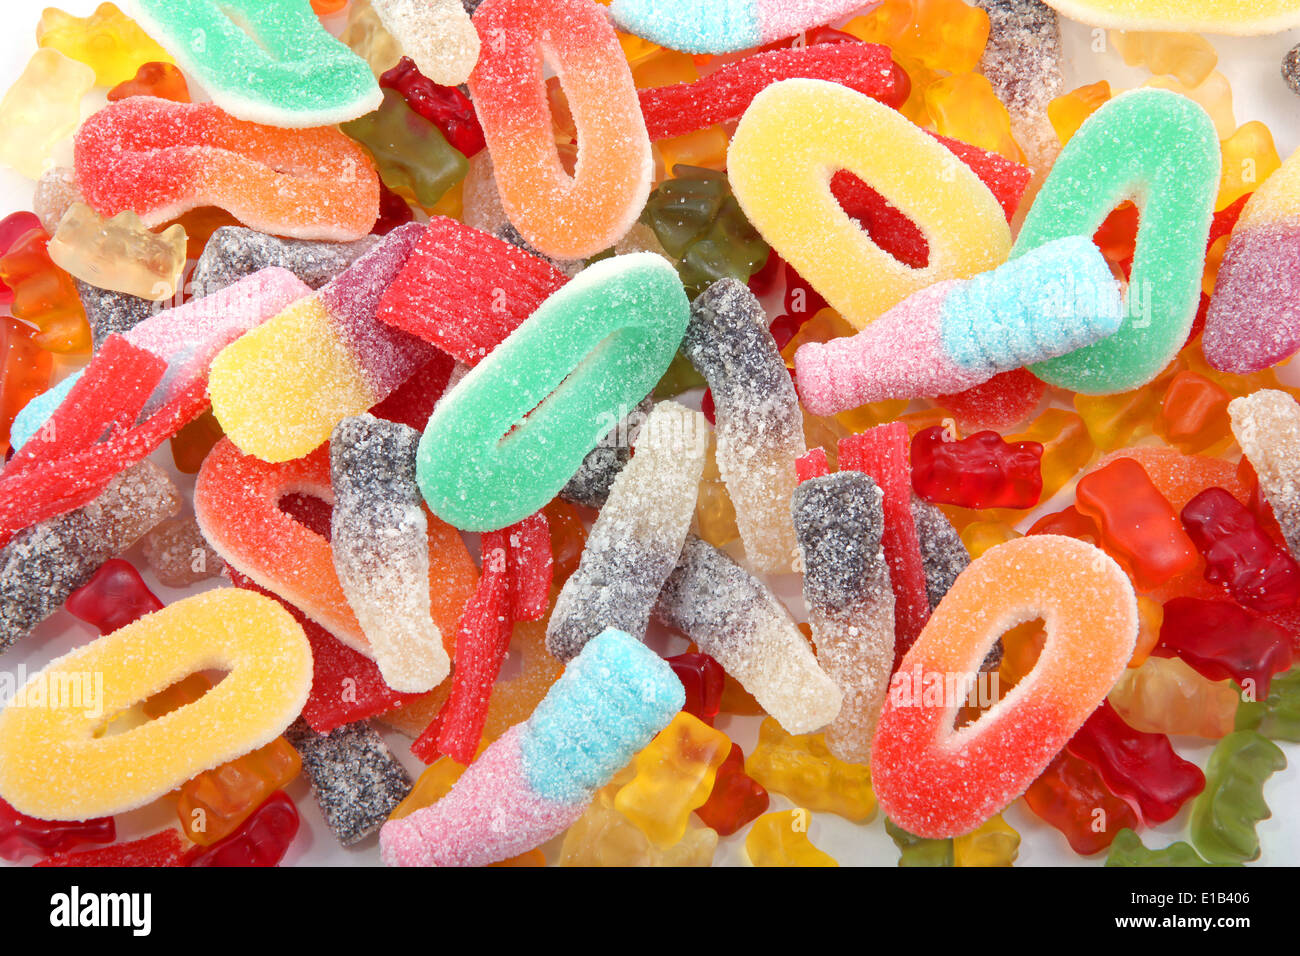 Kids gummy candies or sweeties in multi colors and a variety of shapes. Stock Photo